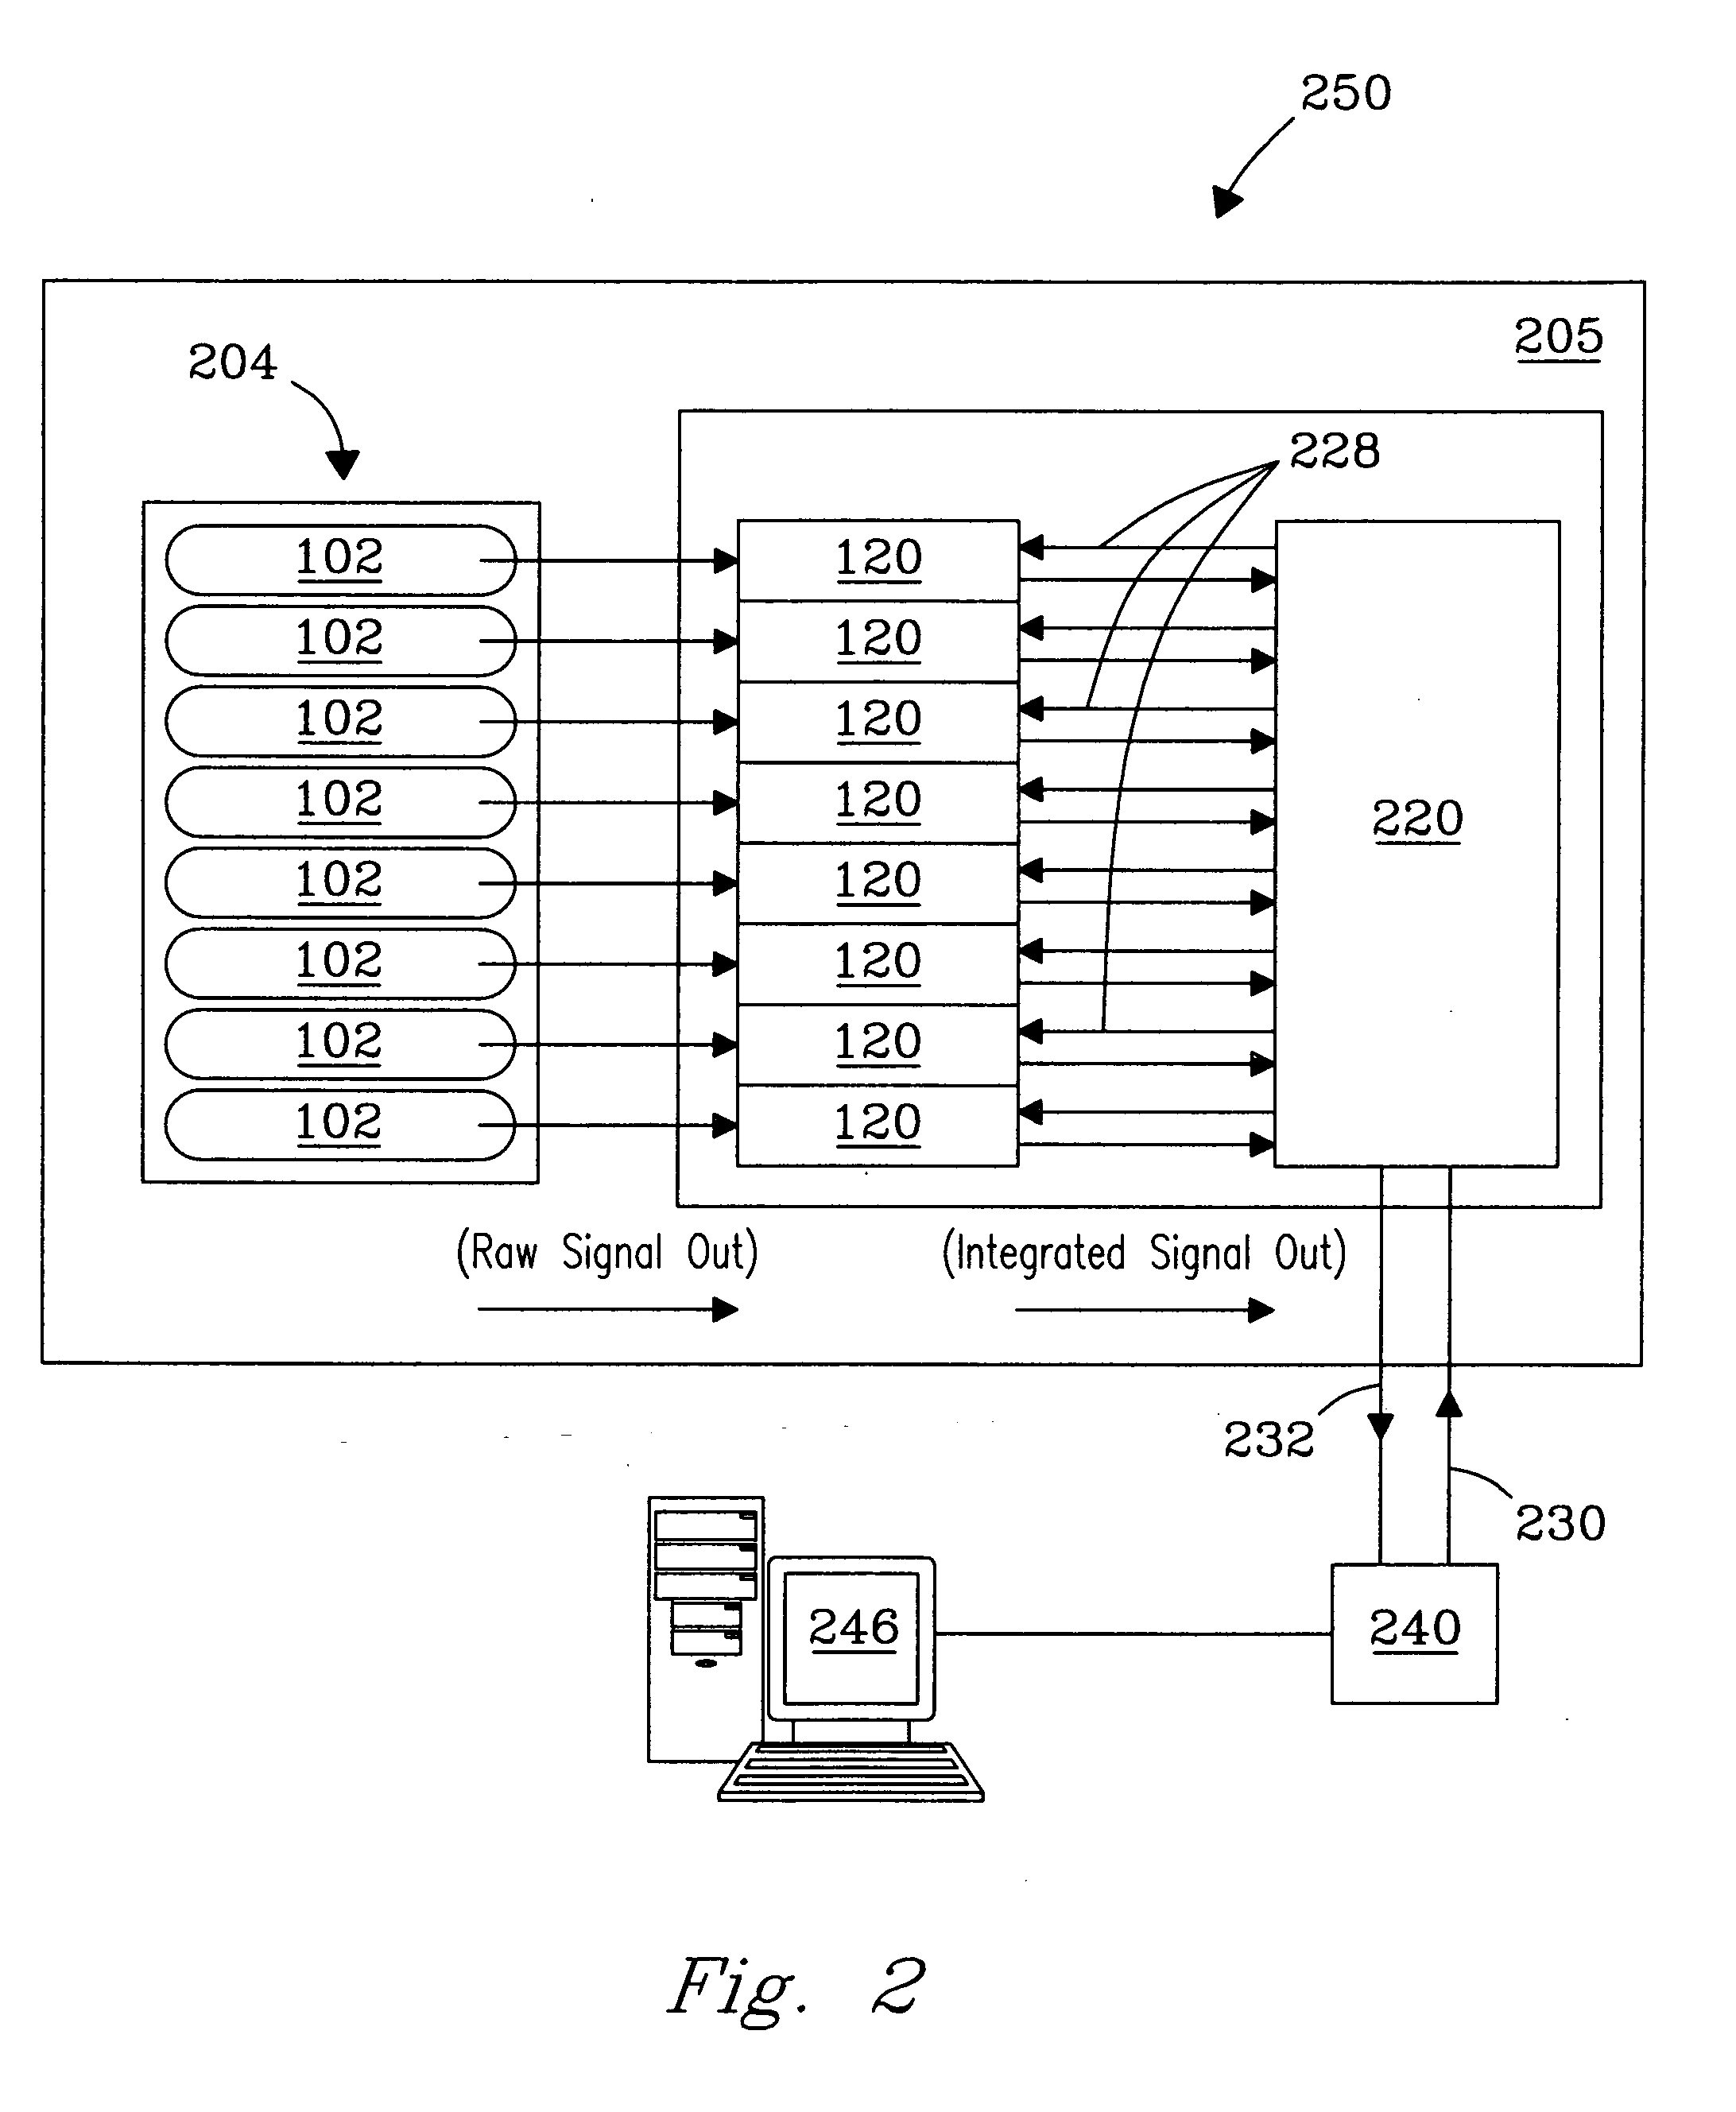 Method and apparatus for simultaneous detection and measurement of charged particles at one or more levels of particle flux for analysis of same